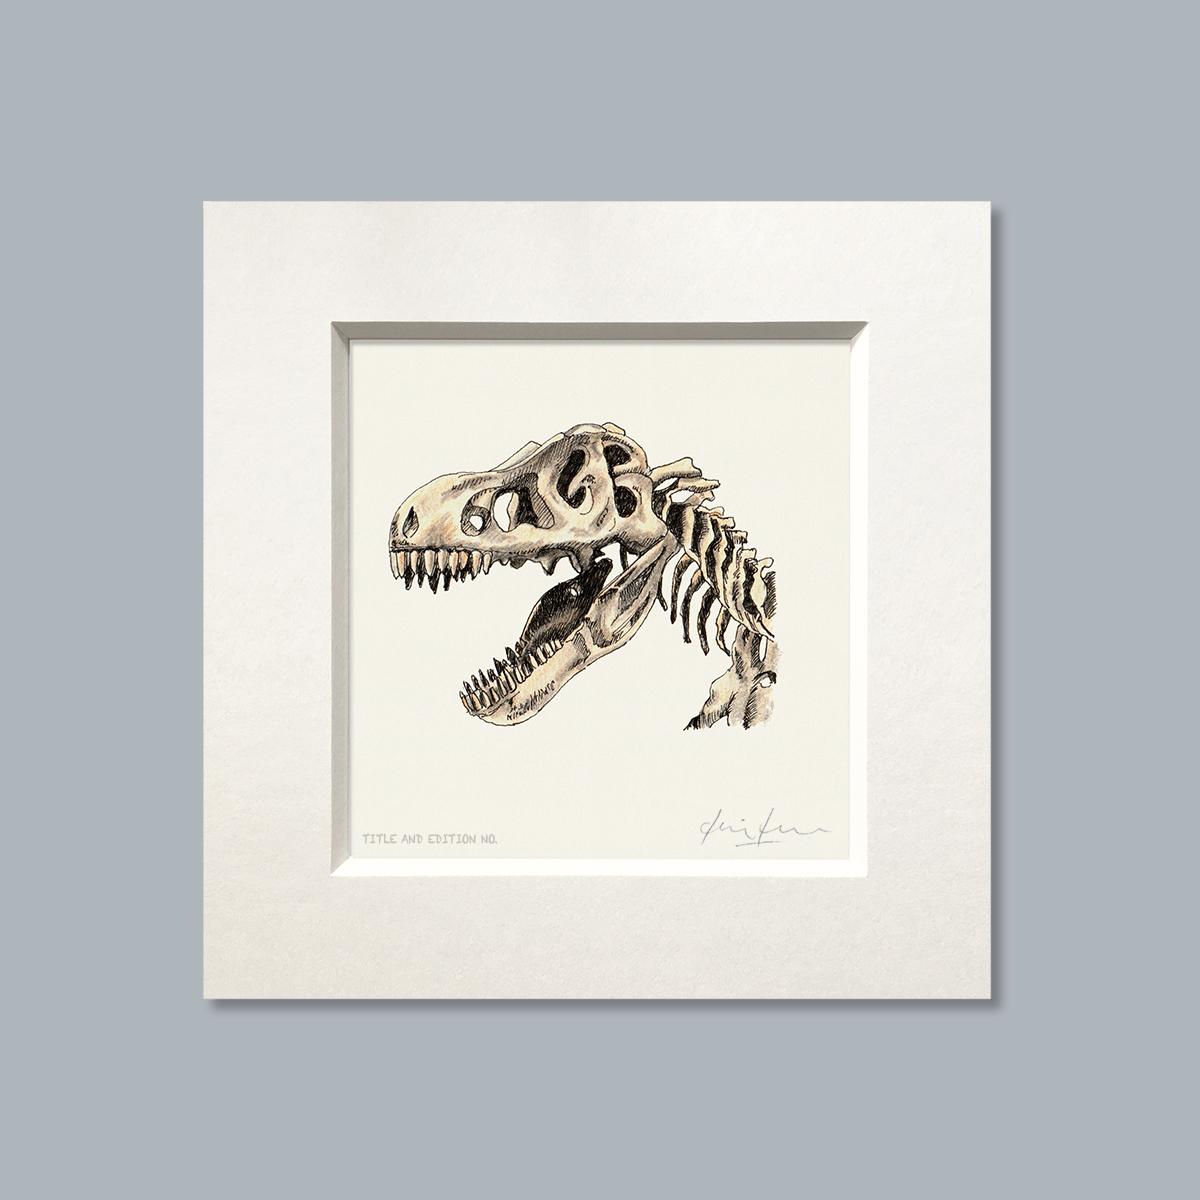 Limited edition print from pen & ink and coloured pencil drawing of a T Rex in a white mount